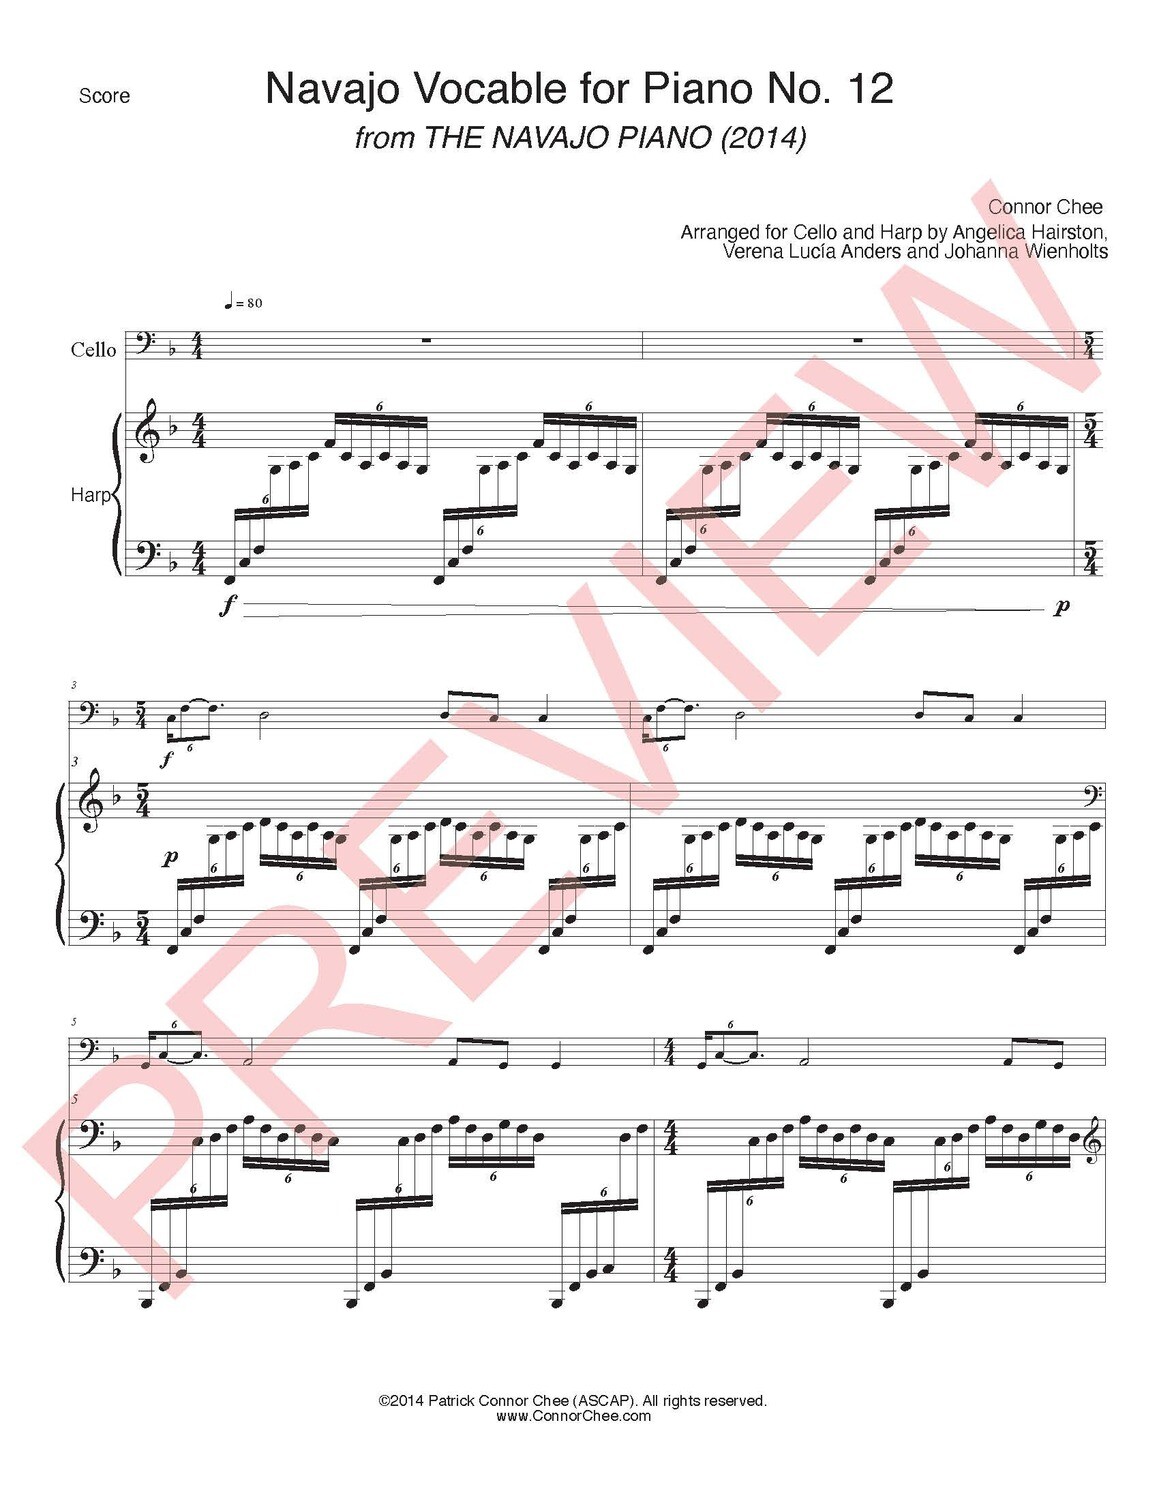 Digital Sheet Music - Navajo Vocable No. 12 (Arranged for Cello and Harp) (Connor Chee)